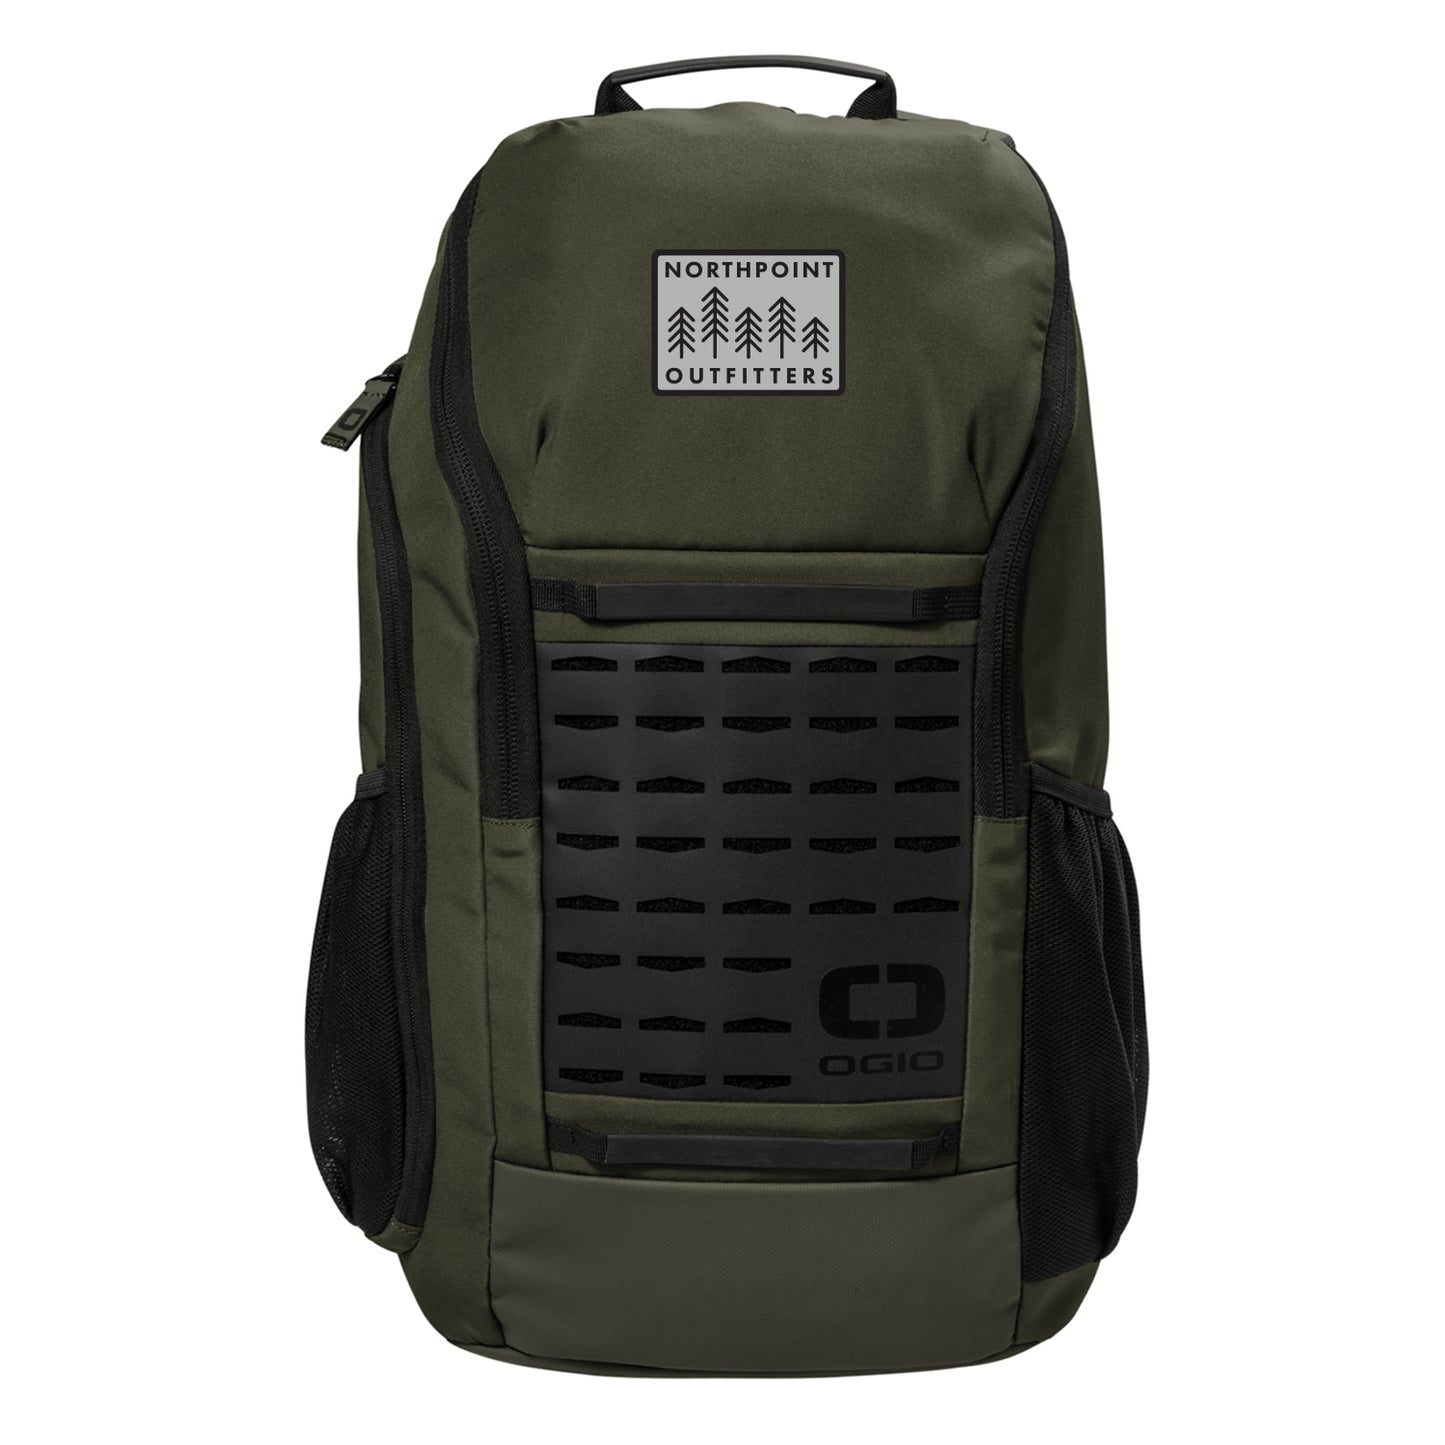 OGIO x NorthPoint Outfitters Surplus Backpack